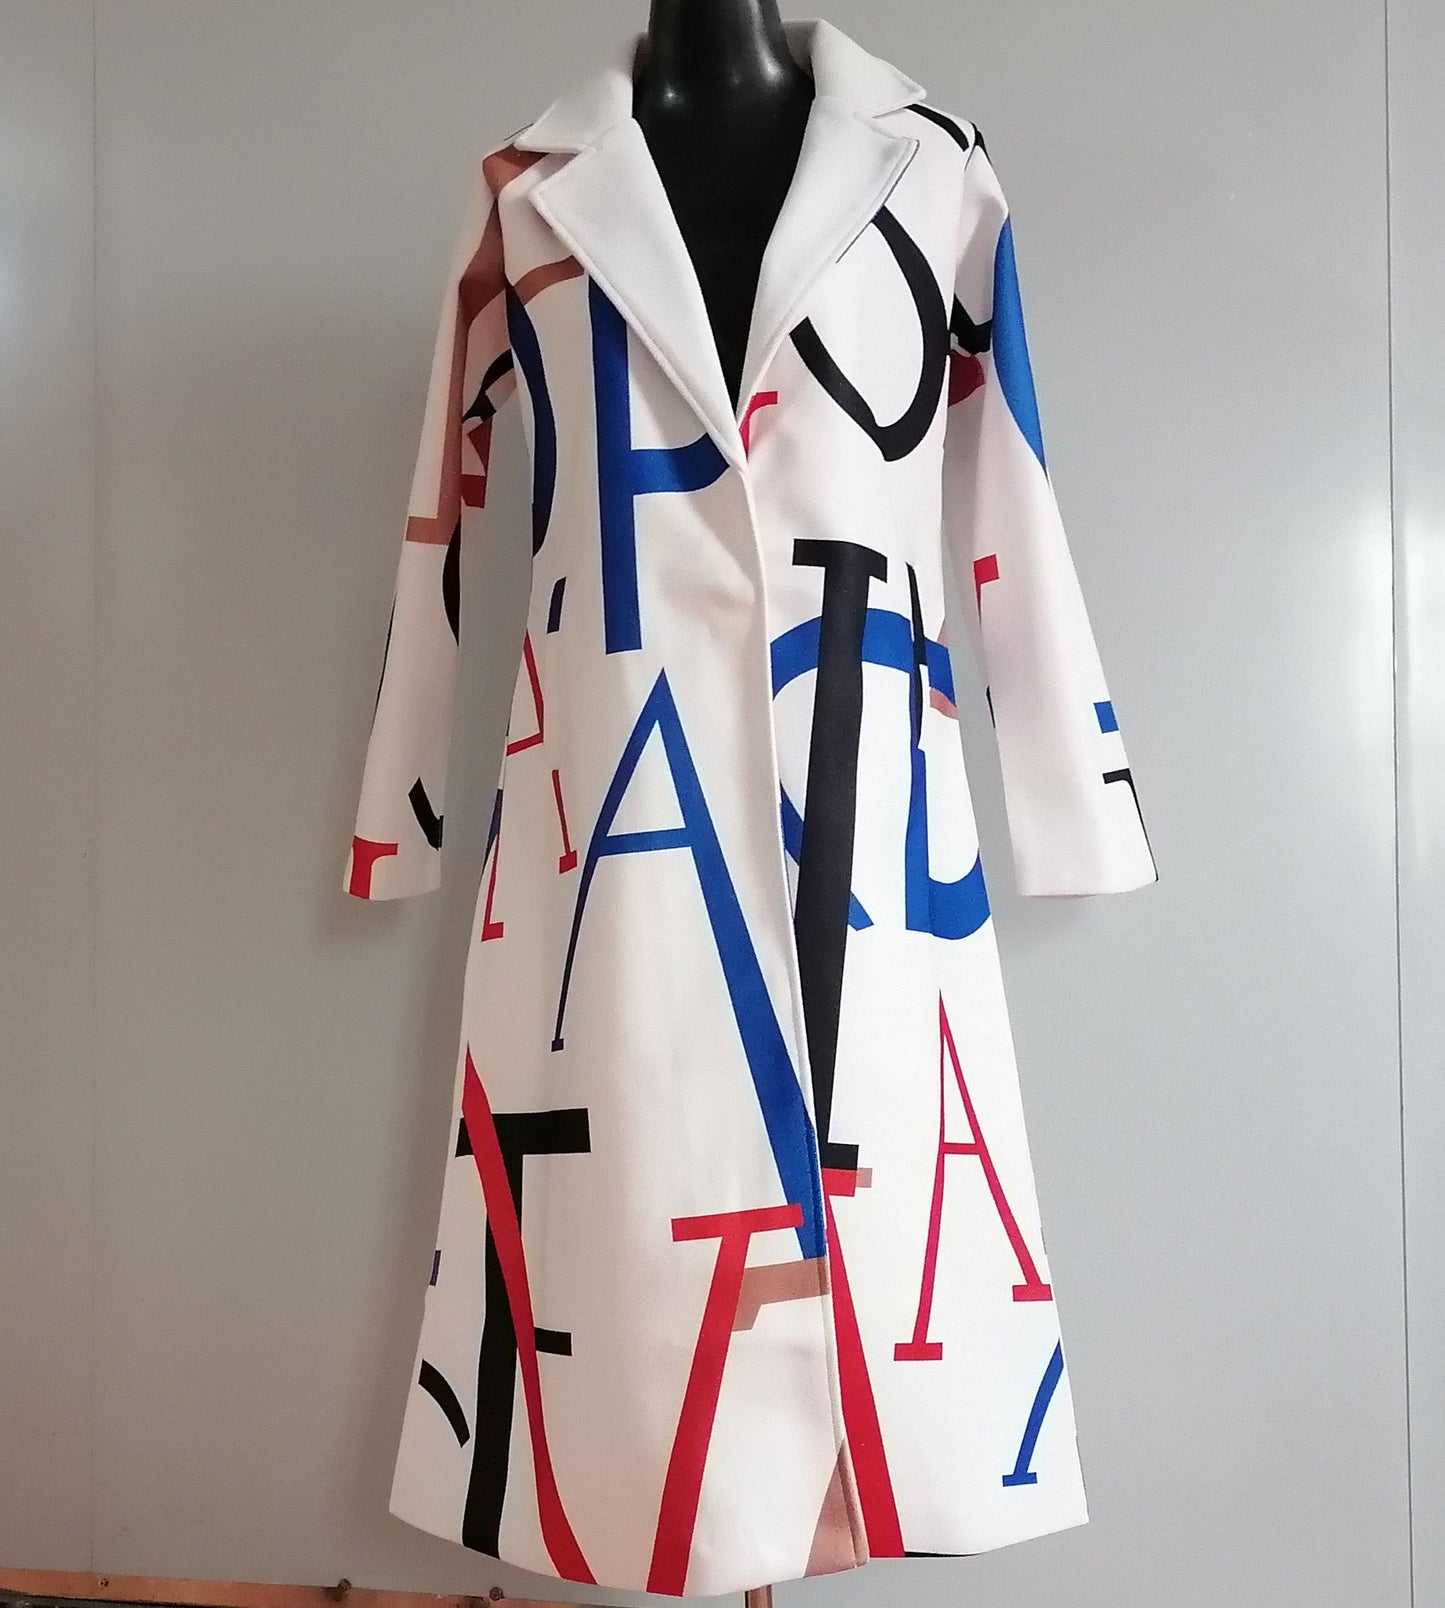 Casual Letter Print Long Coats for Women-Overcoat-The same as picture-S-Free Shipping Leatheretro